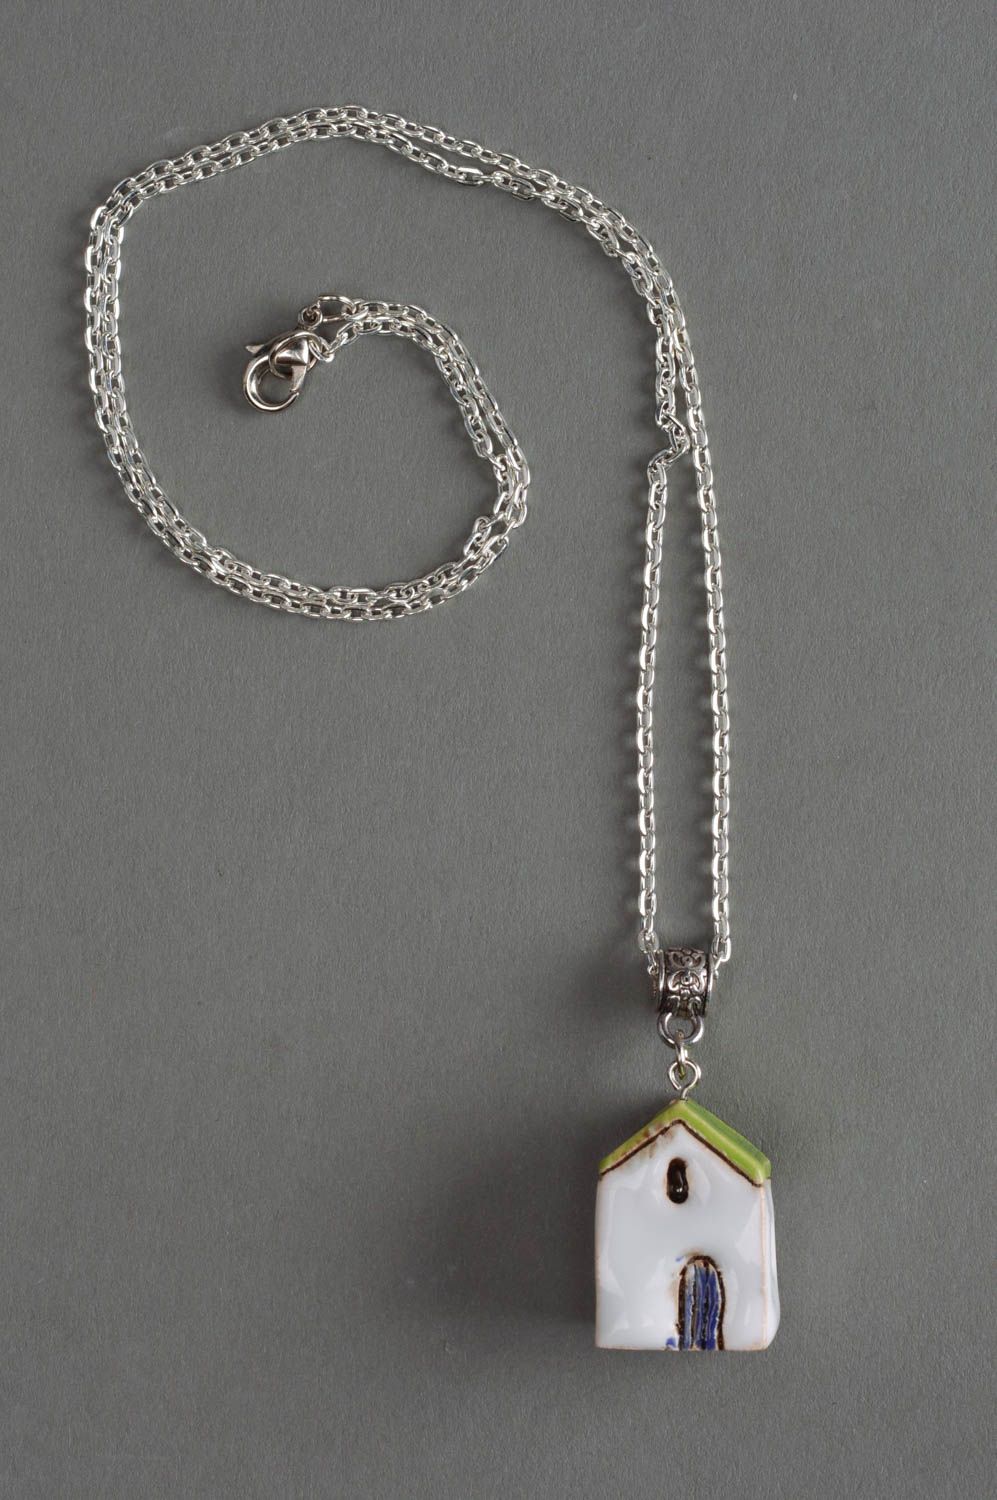 Handmade designer ceramic pendant necklace white house with green roof on chain photo 3